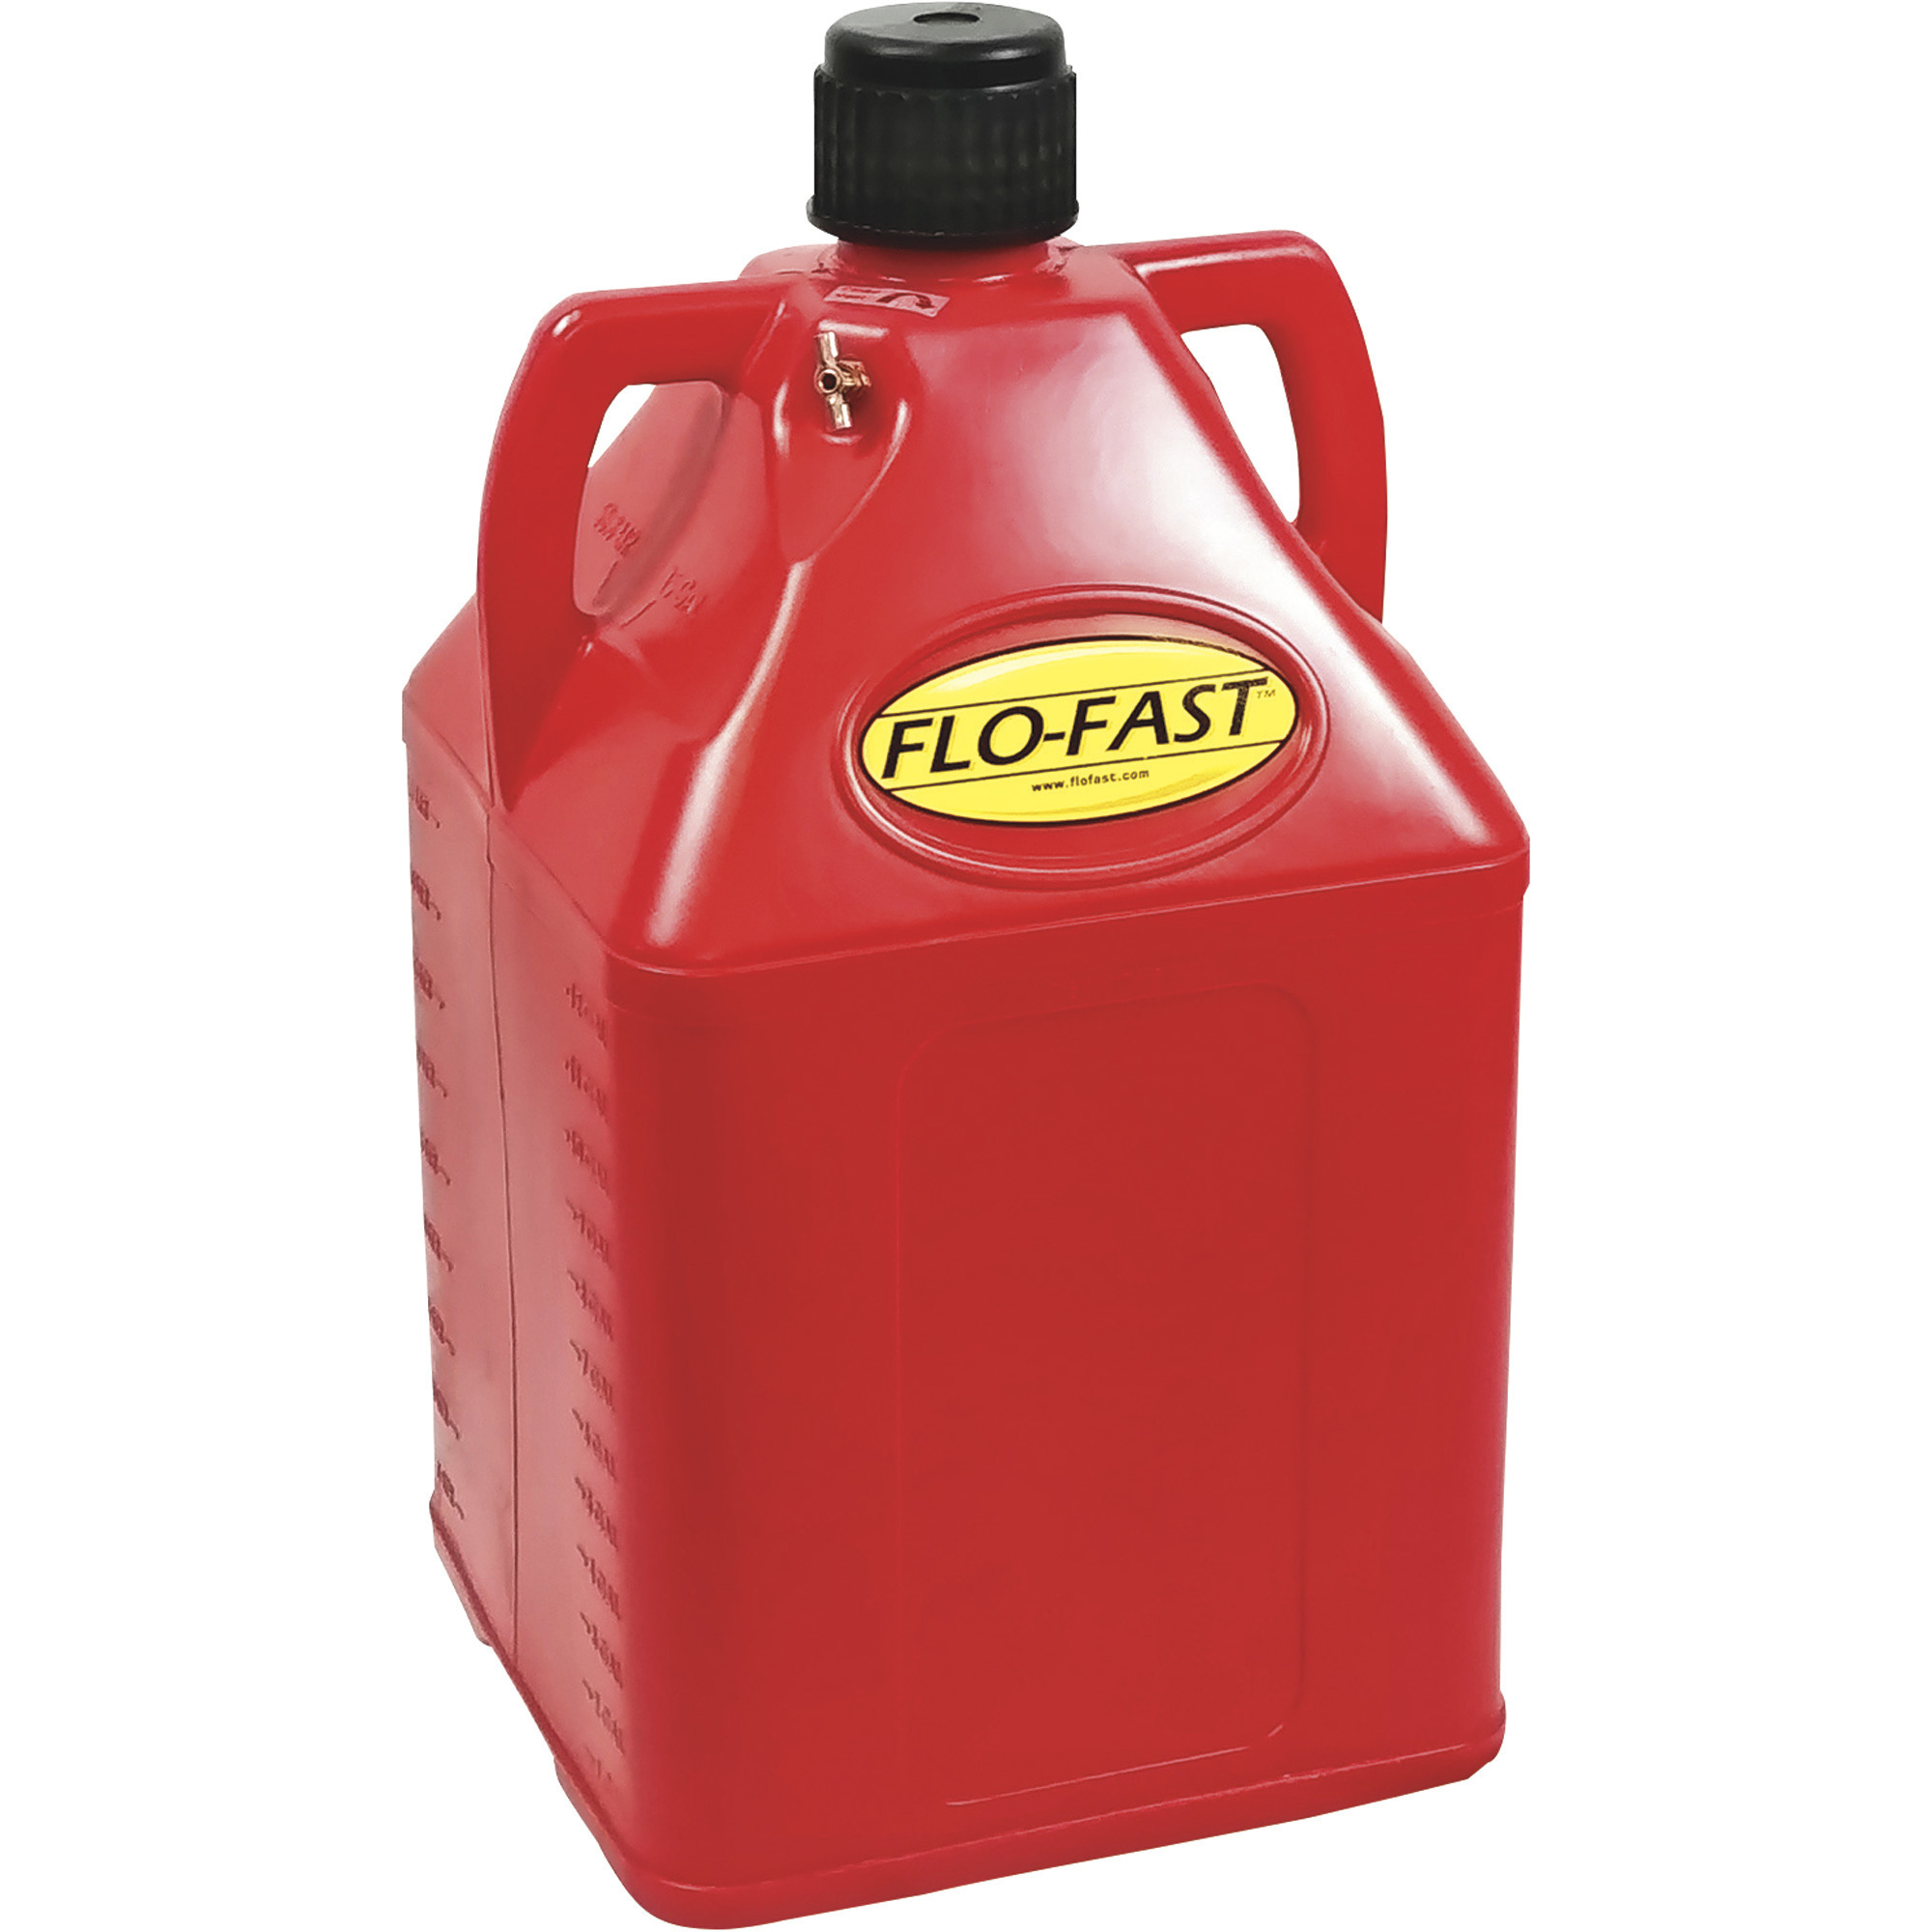 FLO-FAST Container, 15-Gallon, Red, For Gasoline, Model 15501